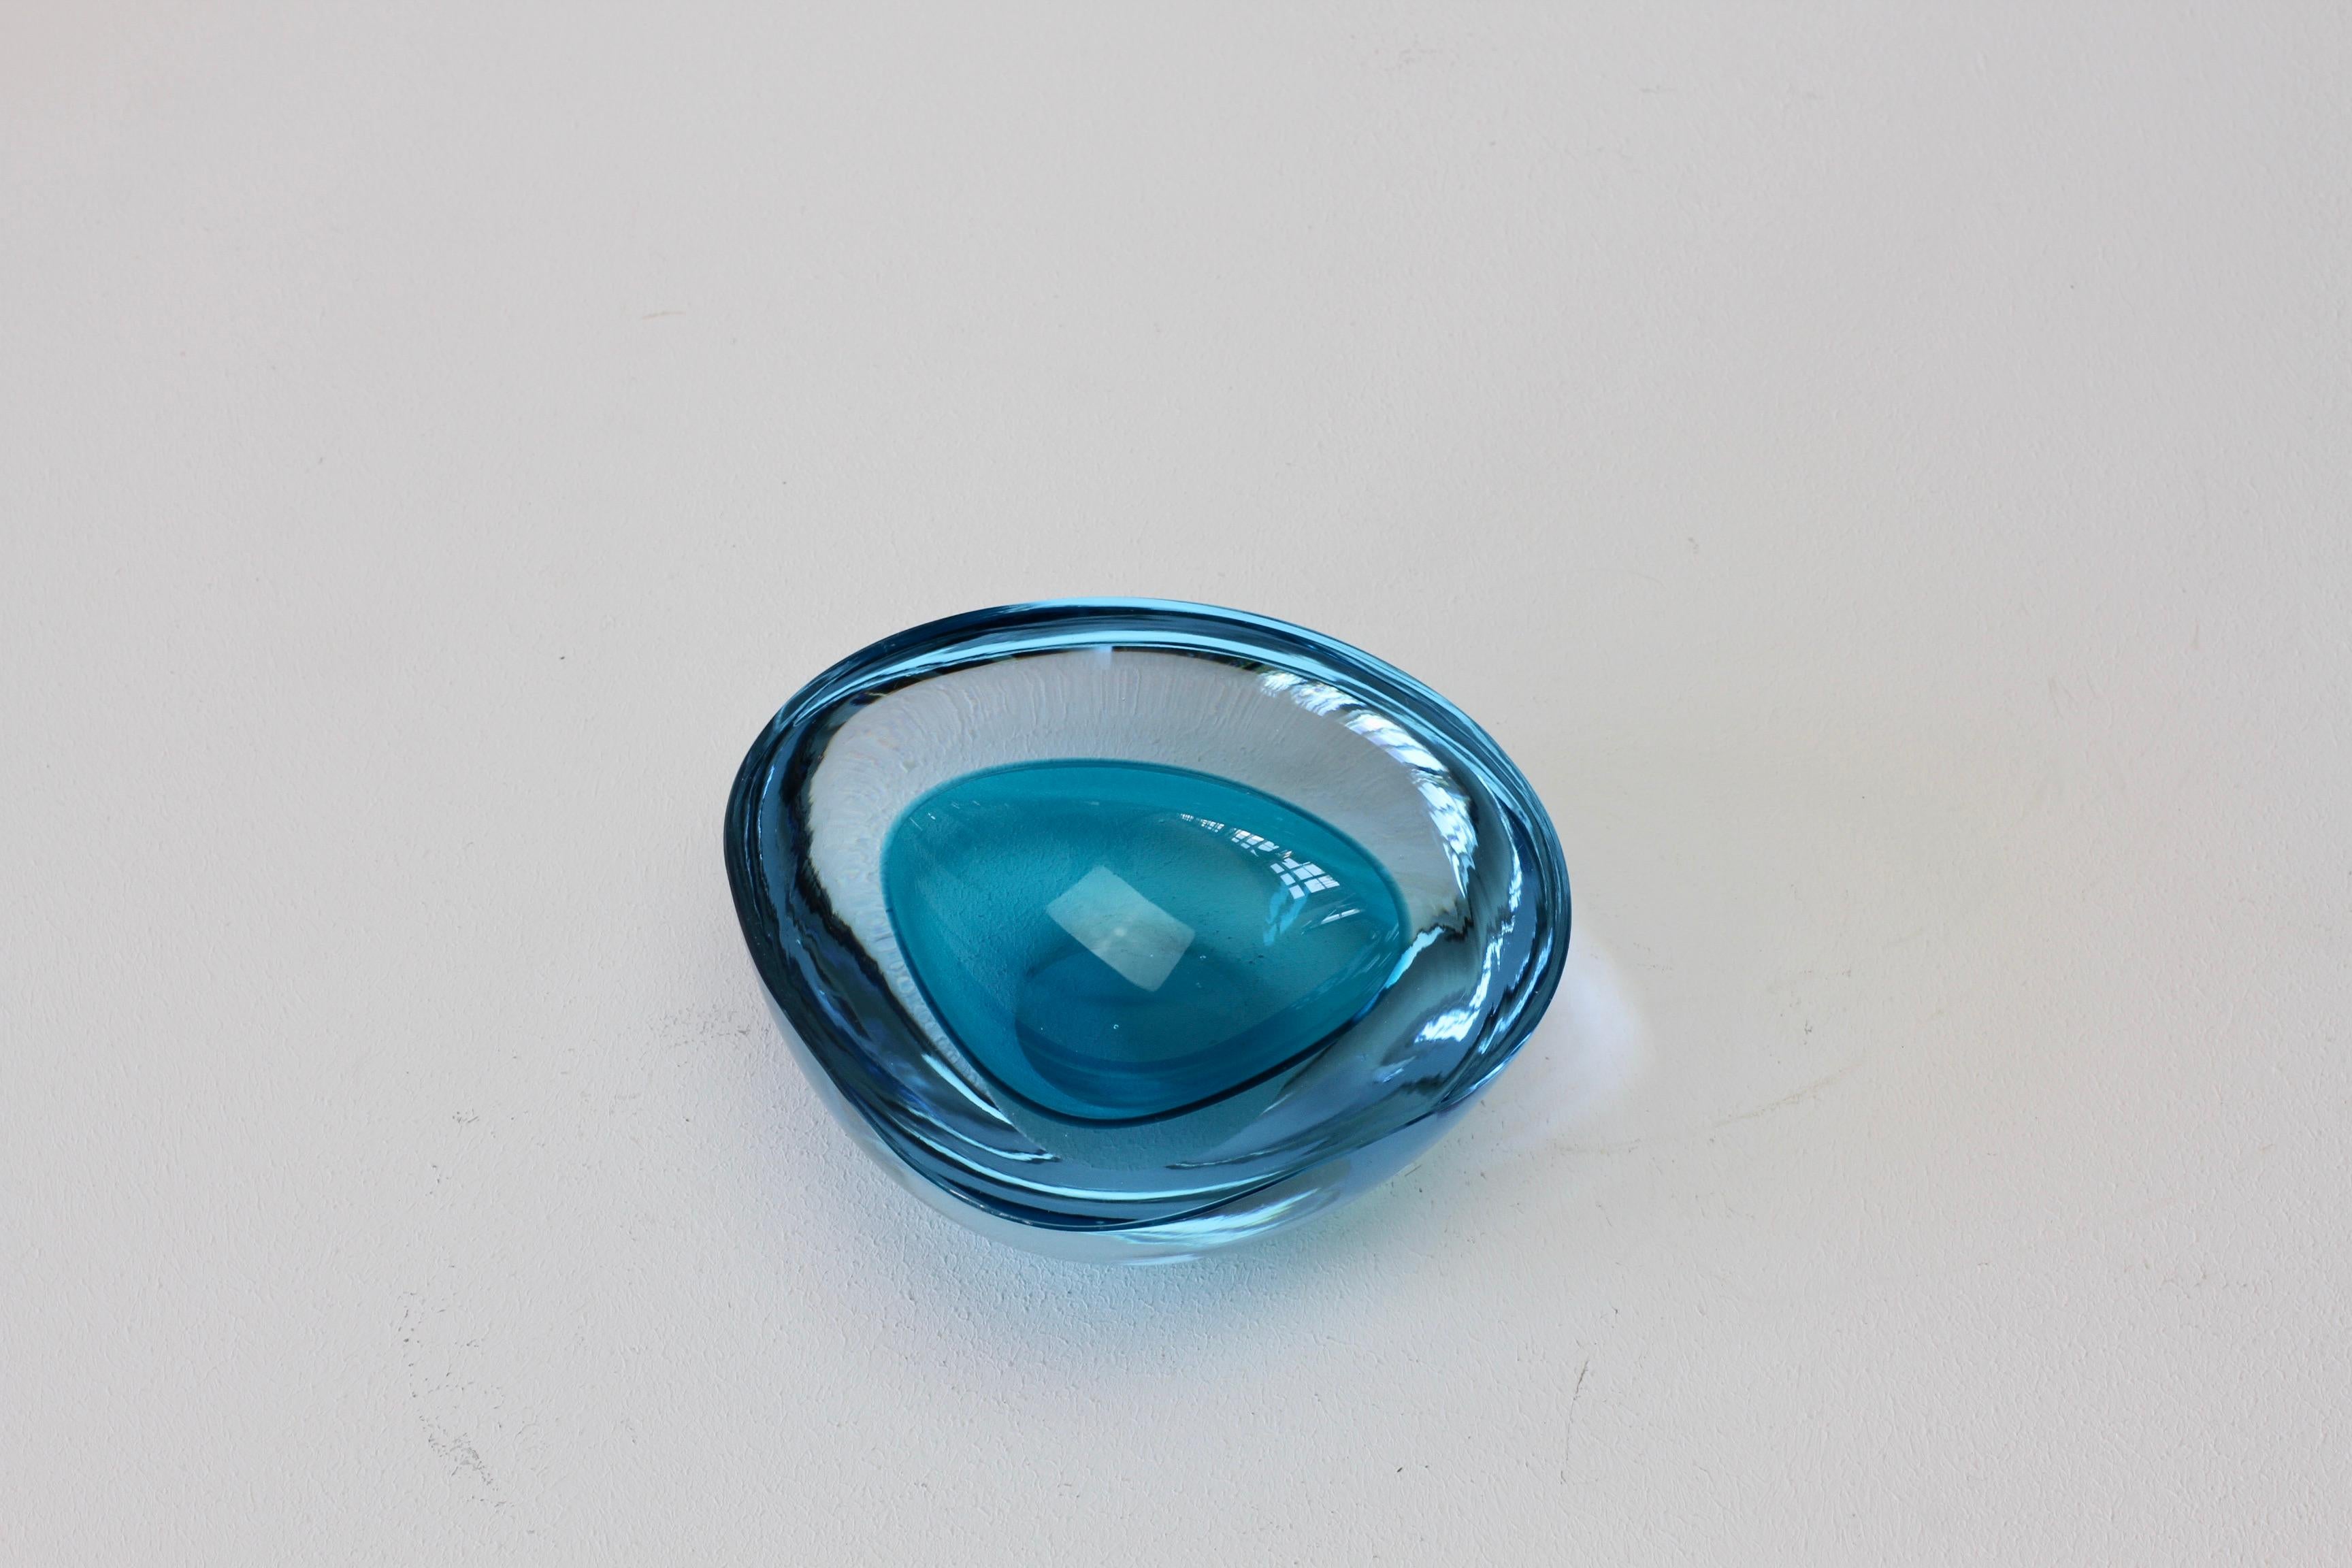 Antonio da Ros (attributed) for Cenedese large and heavy vintage Italian Murano glass bowl, serving dish or ashtray, circa 1965-1975. Utilizing the Sommerso technique this large, heavy piece of glass features an asymmetric design of blue over light